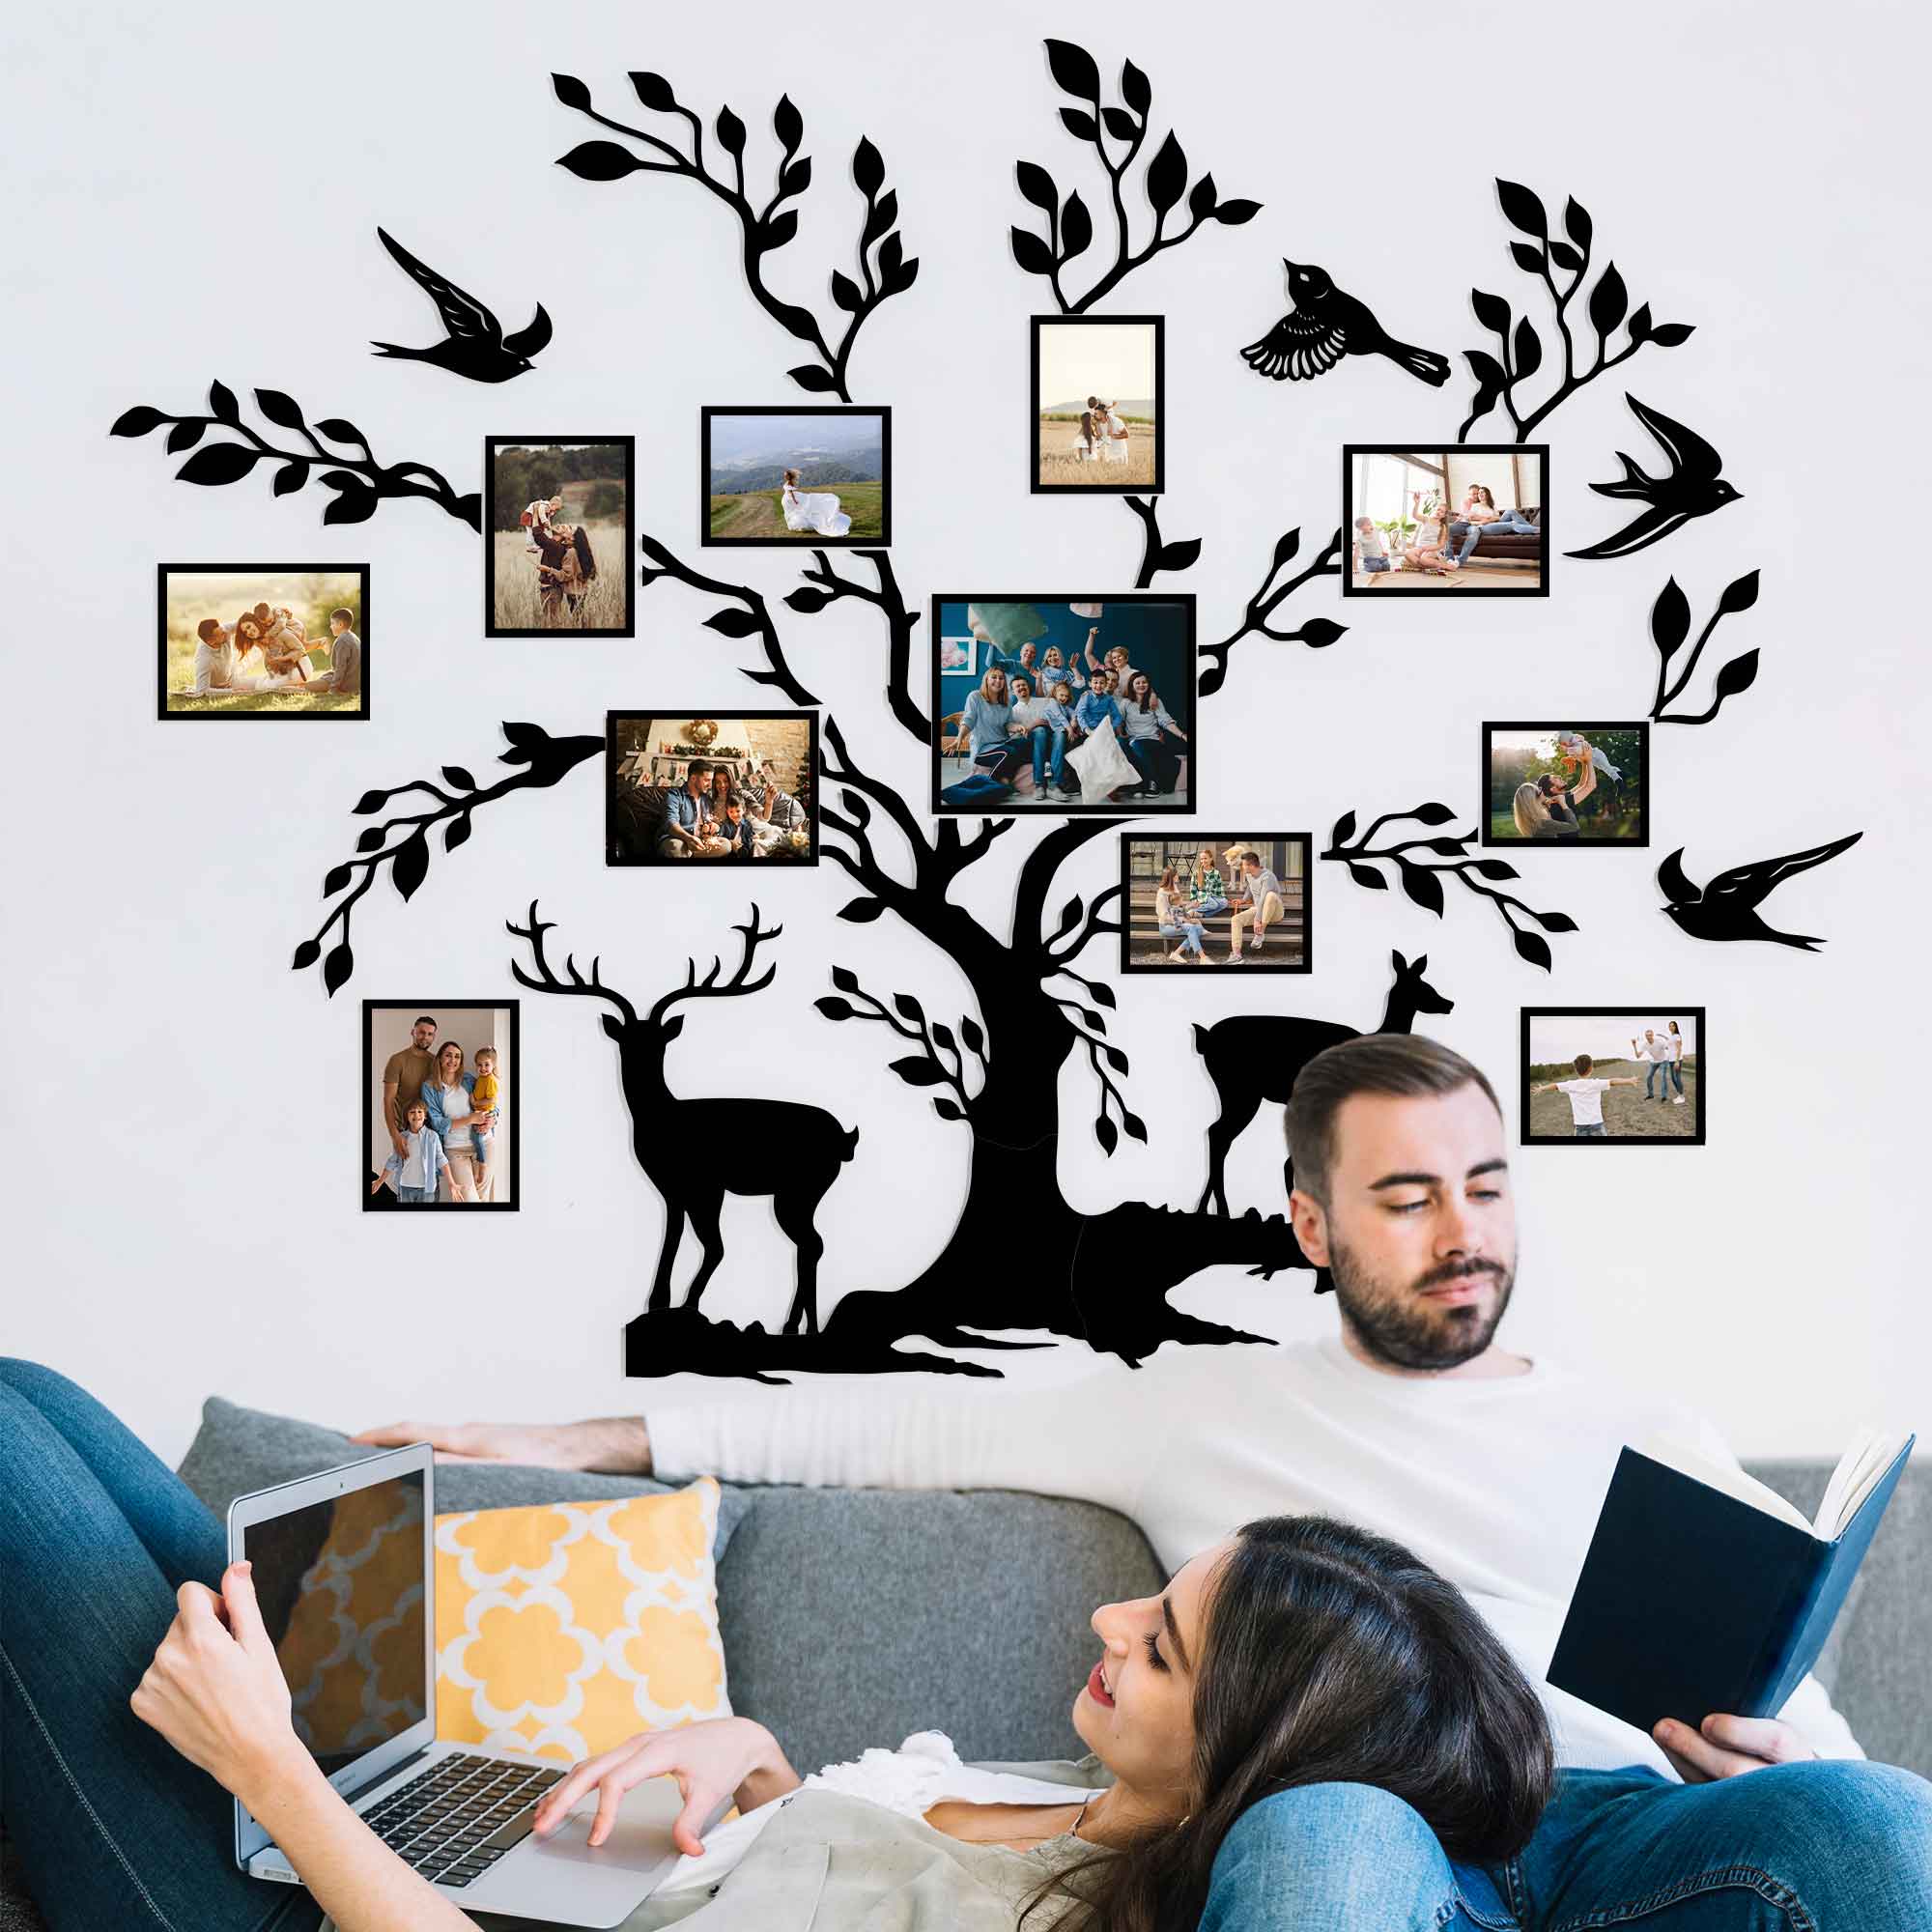 Large Family Photos Collage Framed in a Beautiful Wood Tree